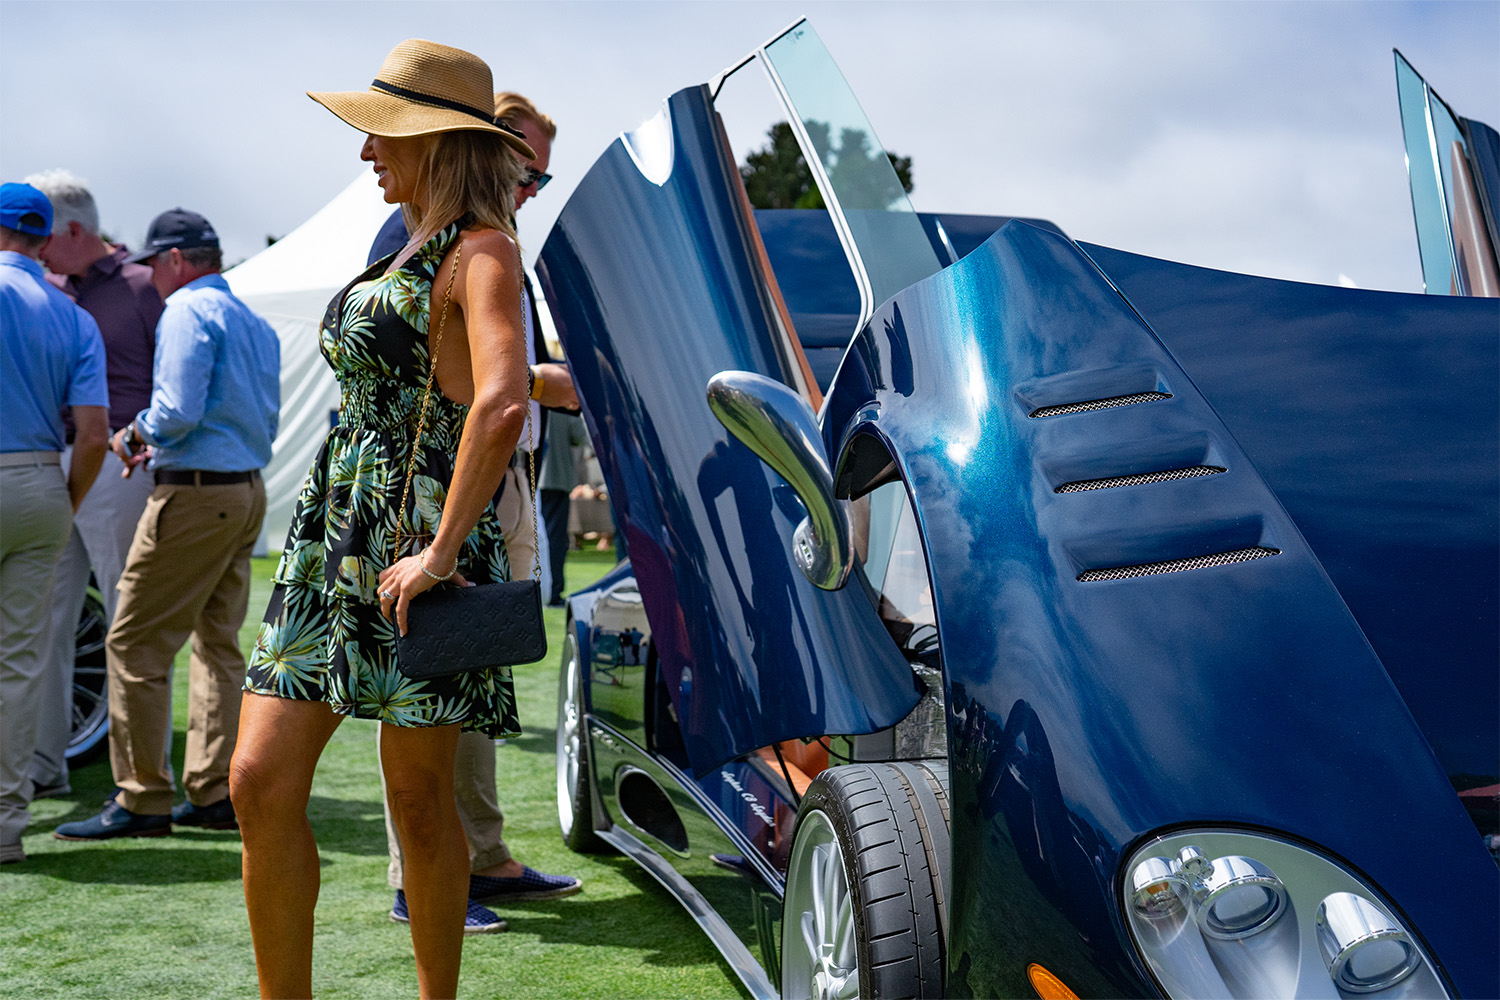 Spectator at Concourse d'Elegance at Pebble Beach